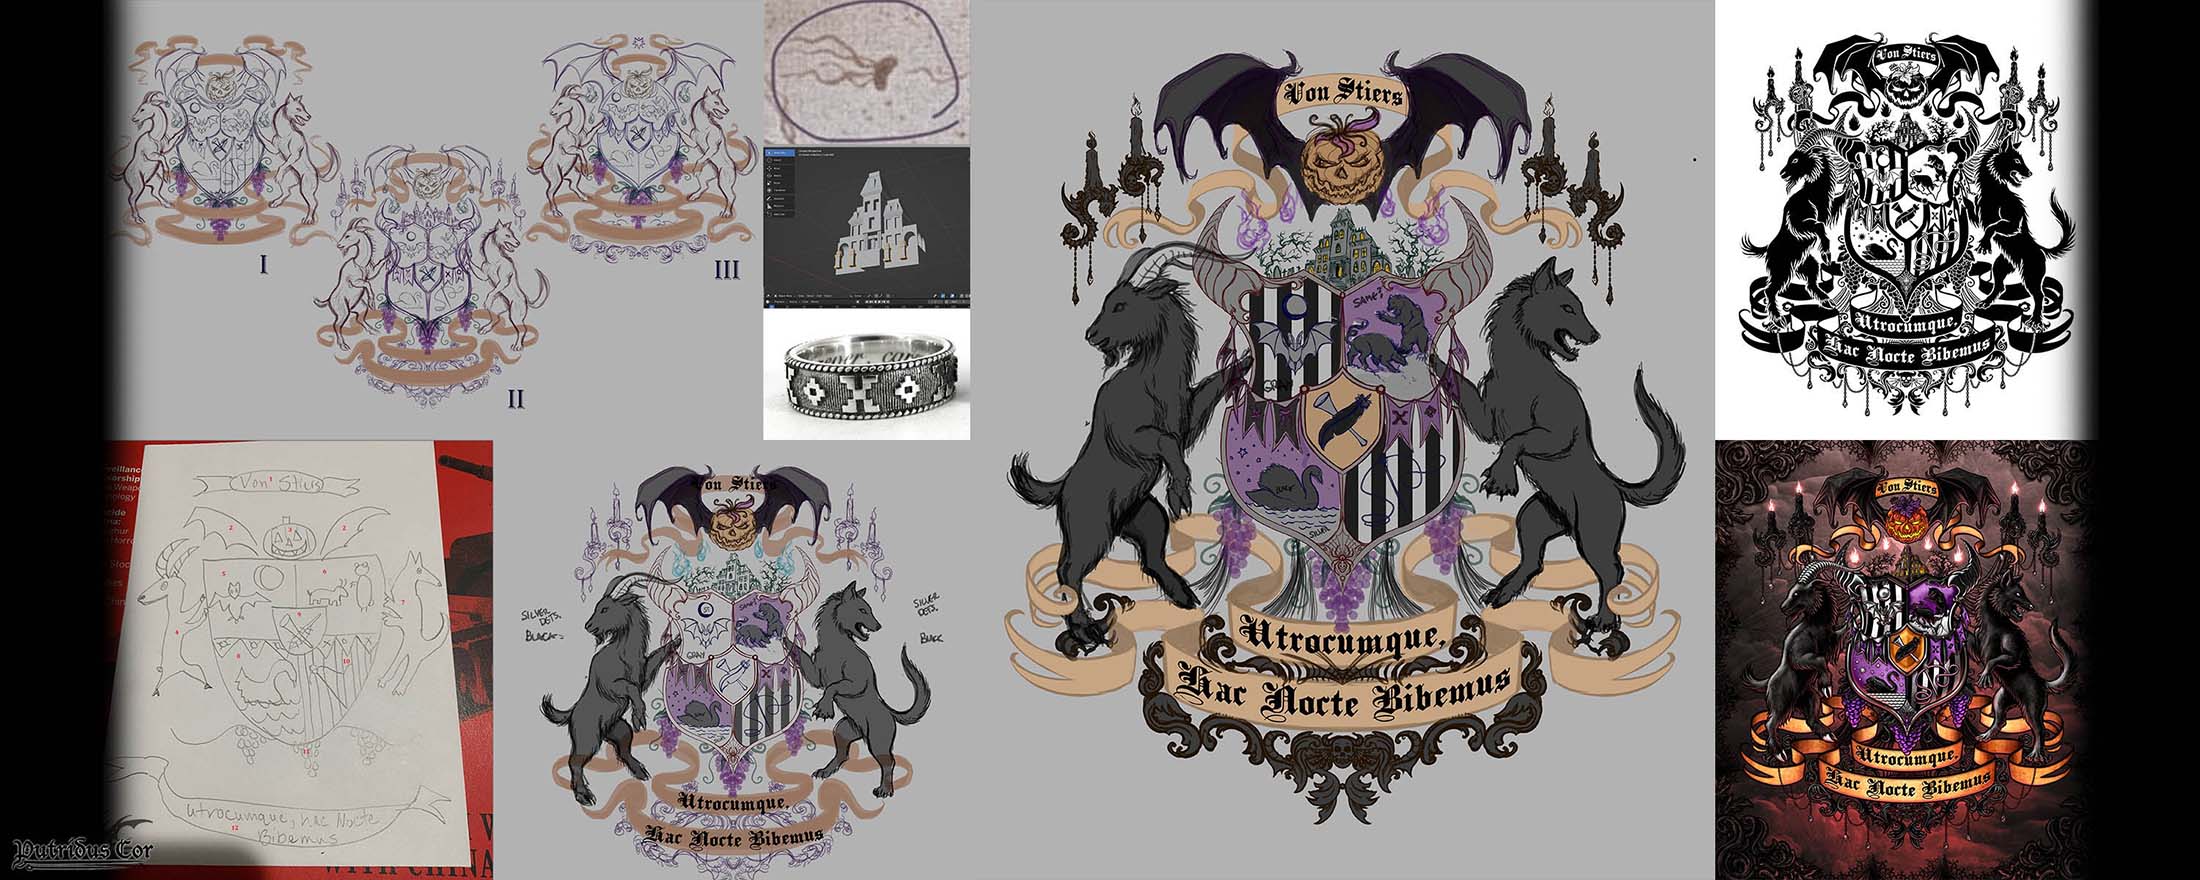 Process of making a Gothic Coat of Arms Design, Halloween inspired, by Putridus Cor